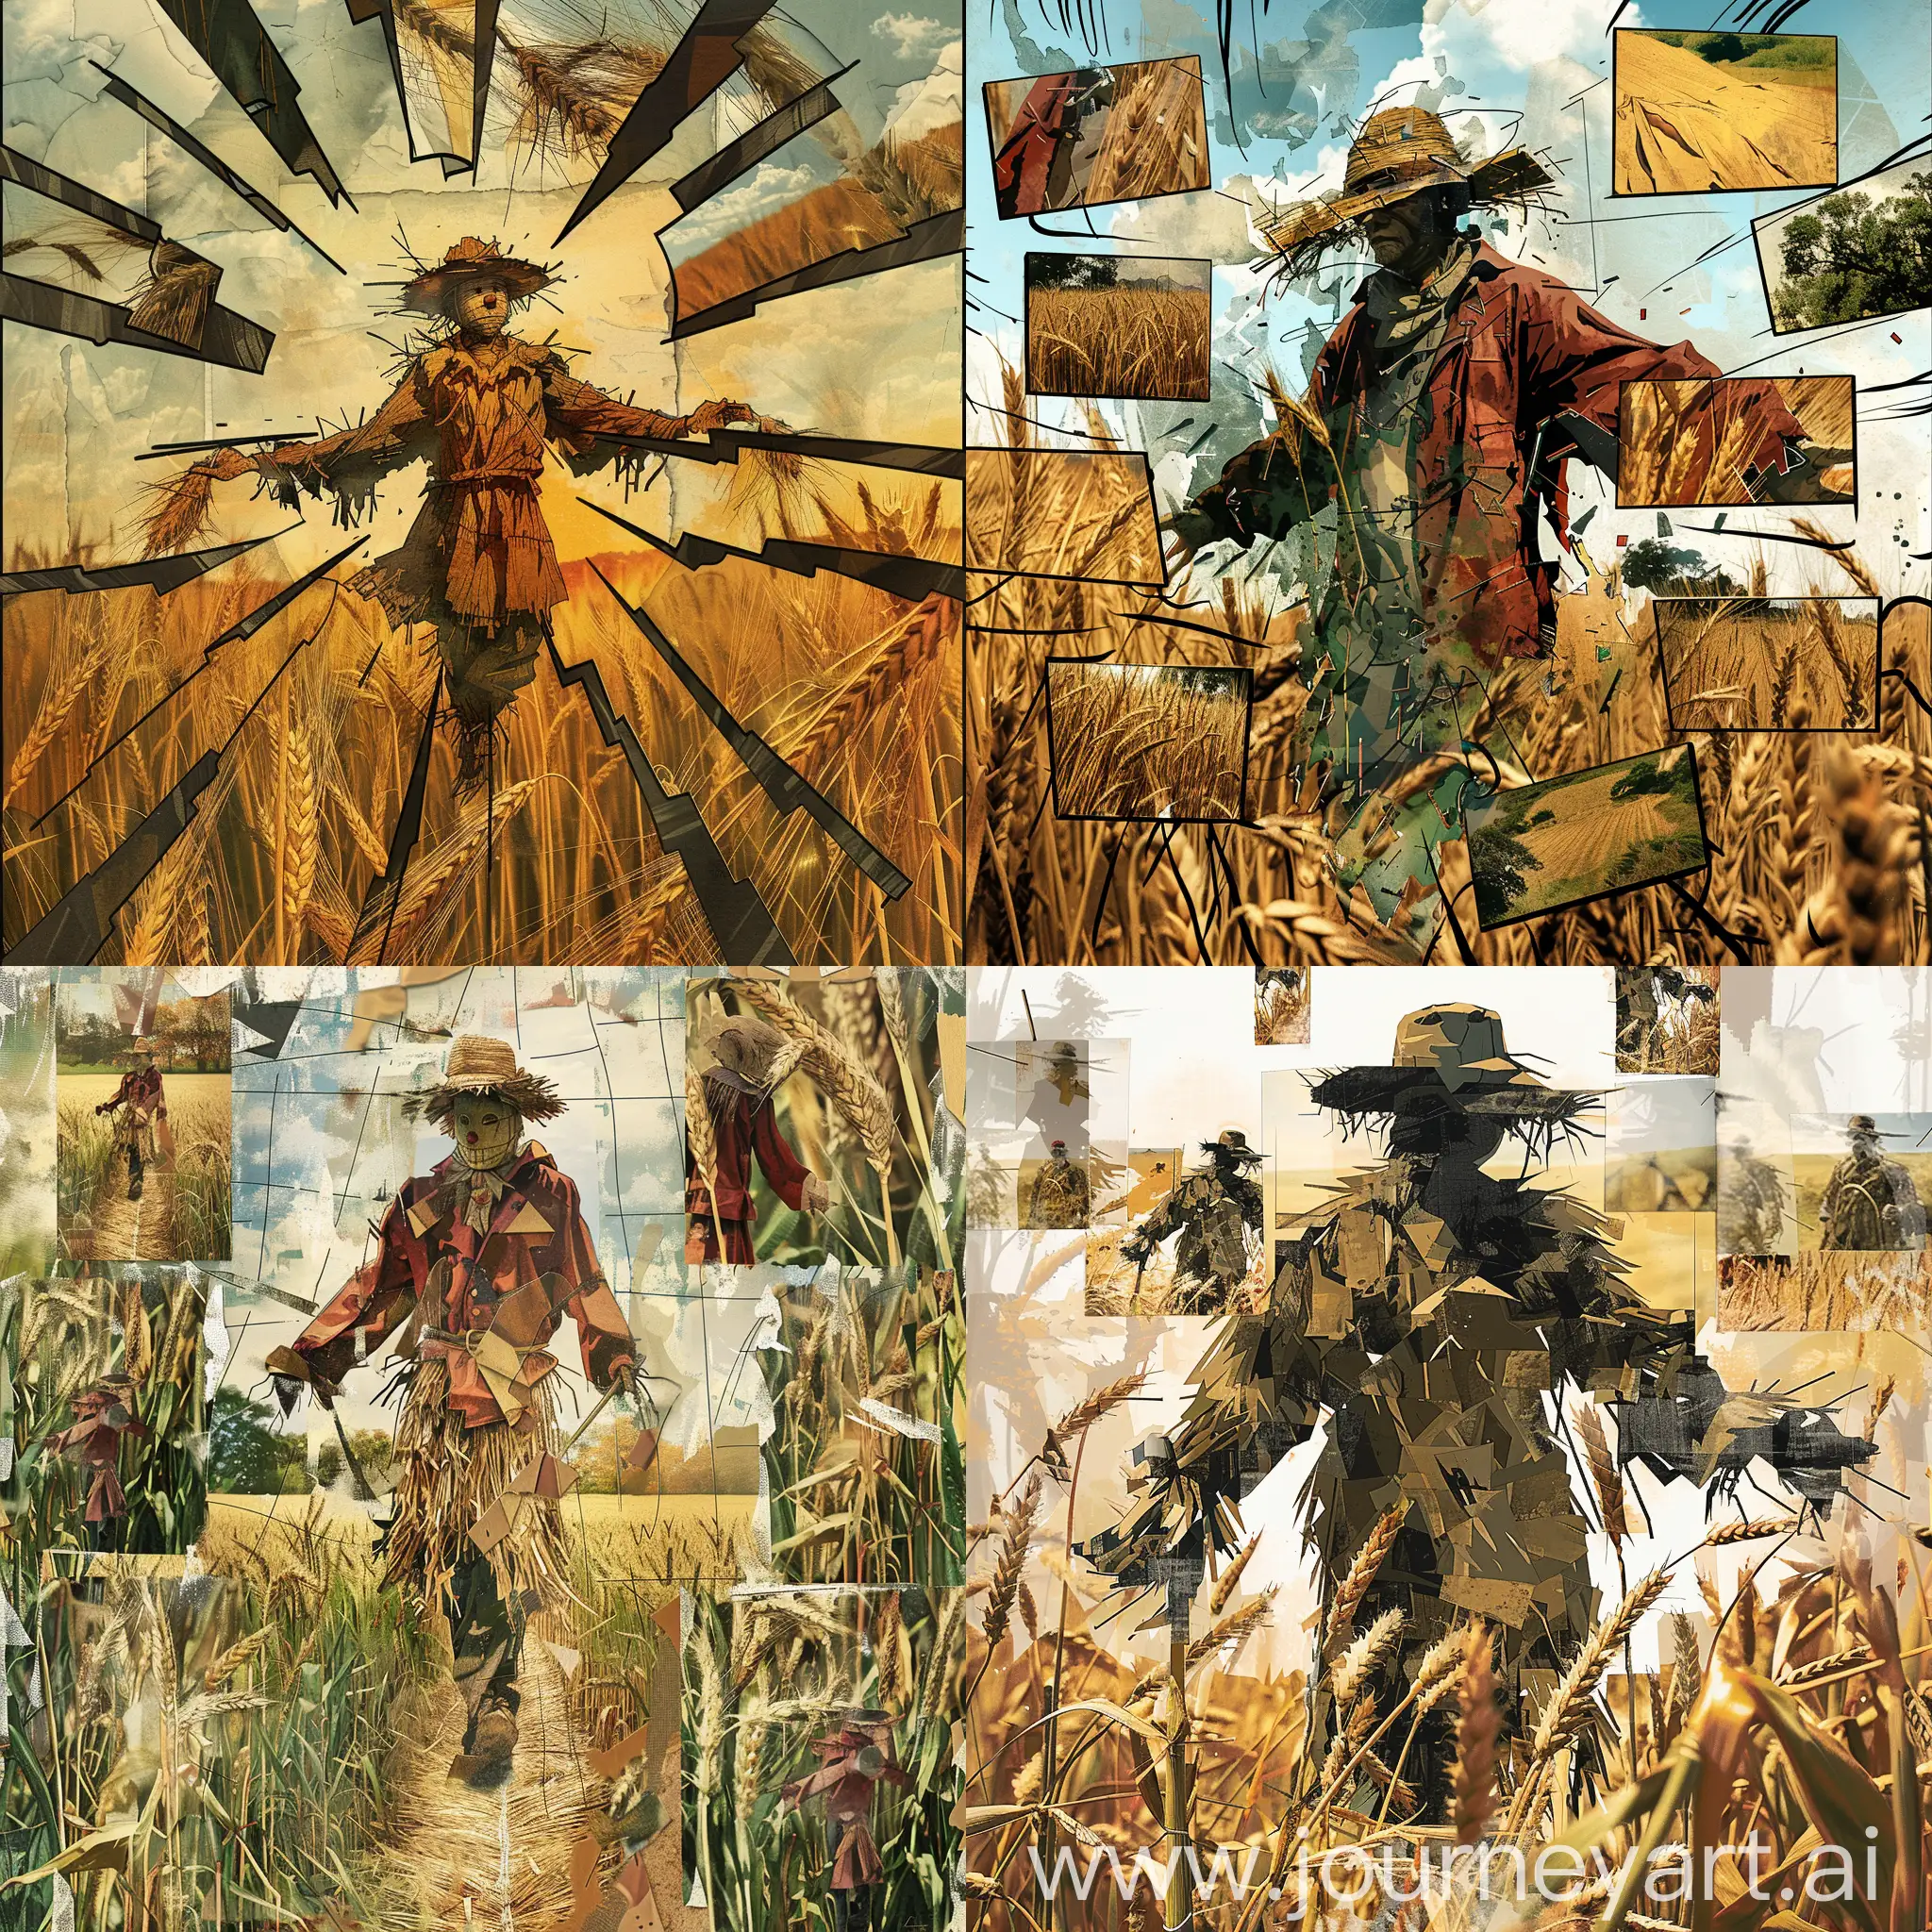 an story named "the straw bride". a art with a several pasted cuts of a scarecrow surrounded by a wheat field, a scarecrow, digital art, comic book